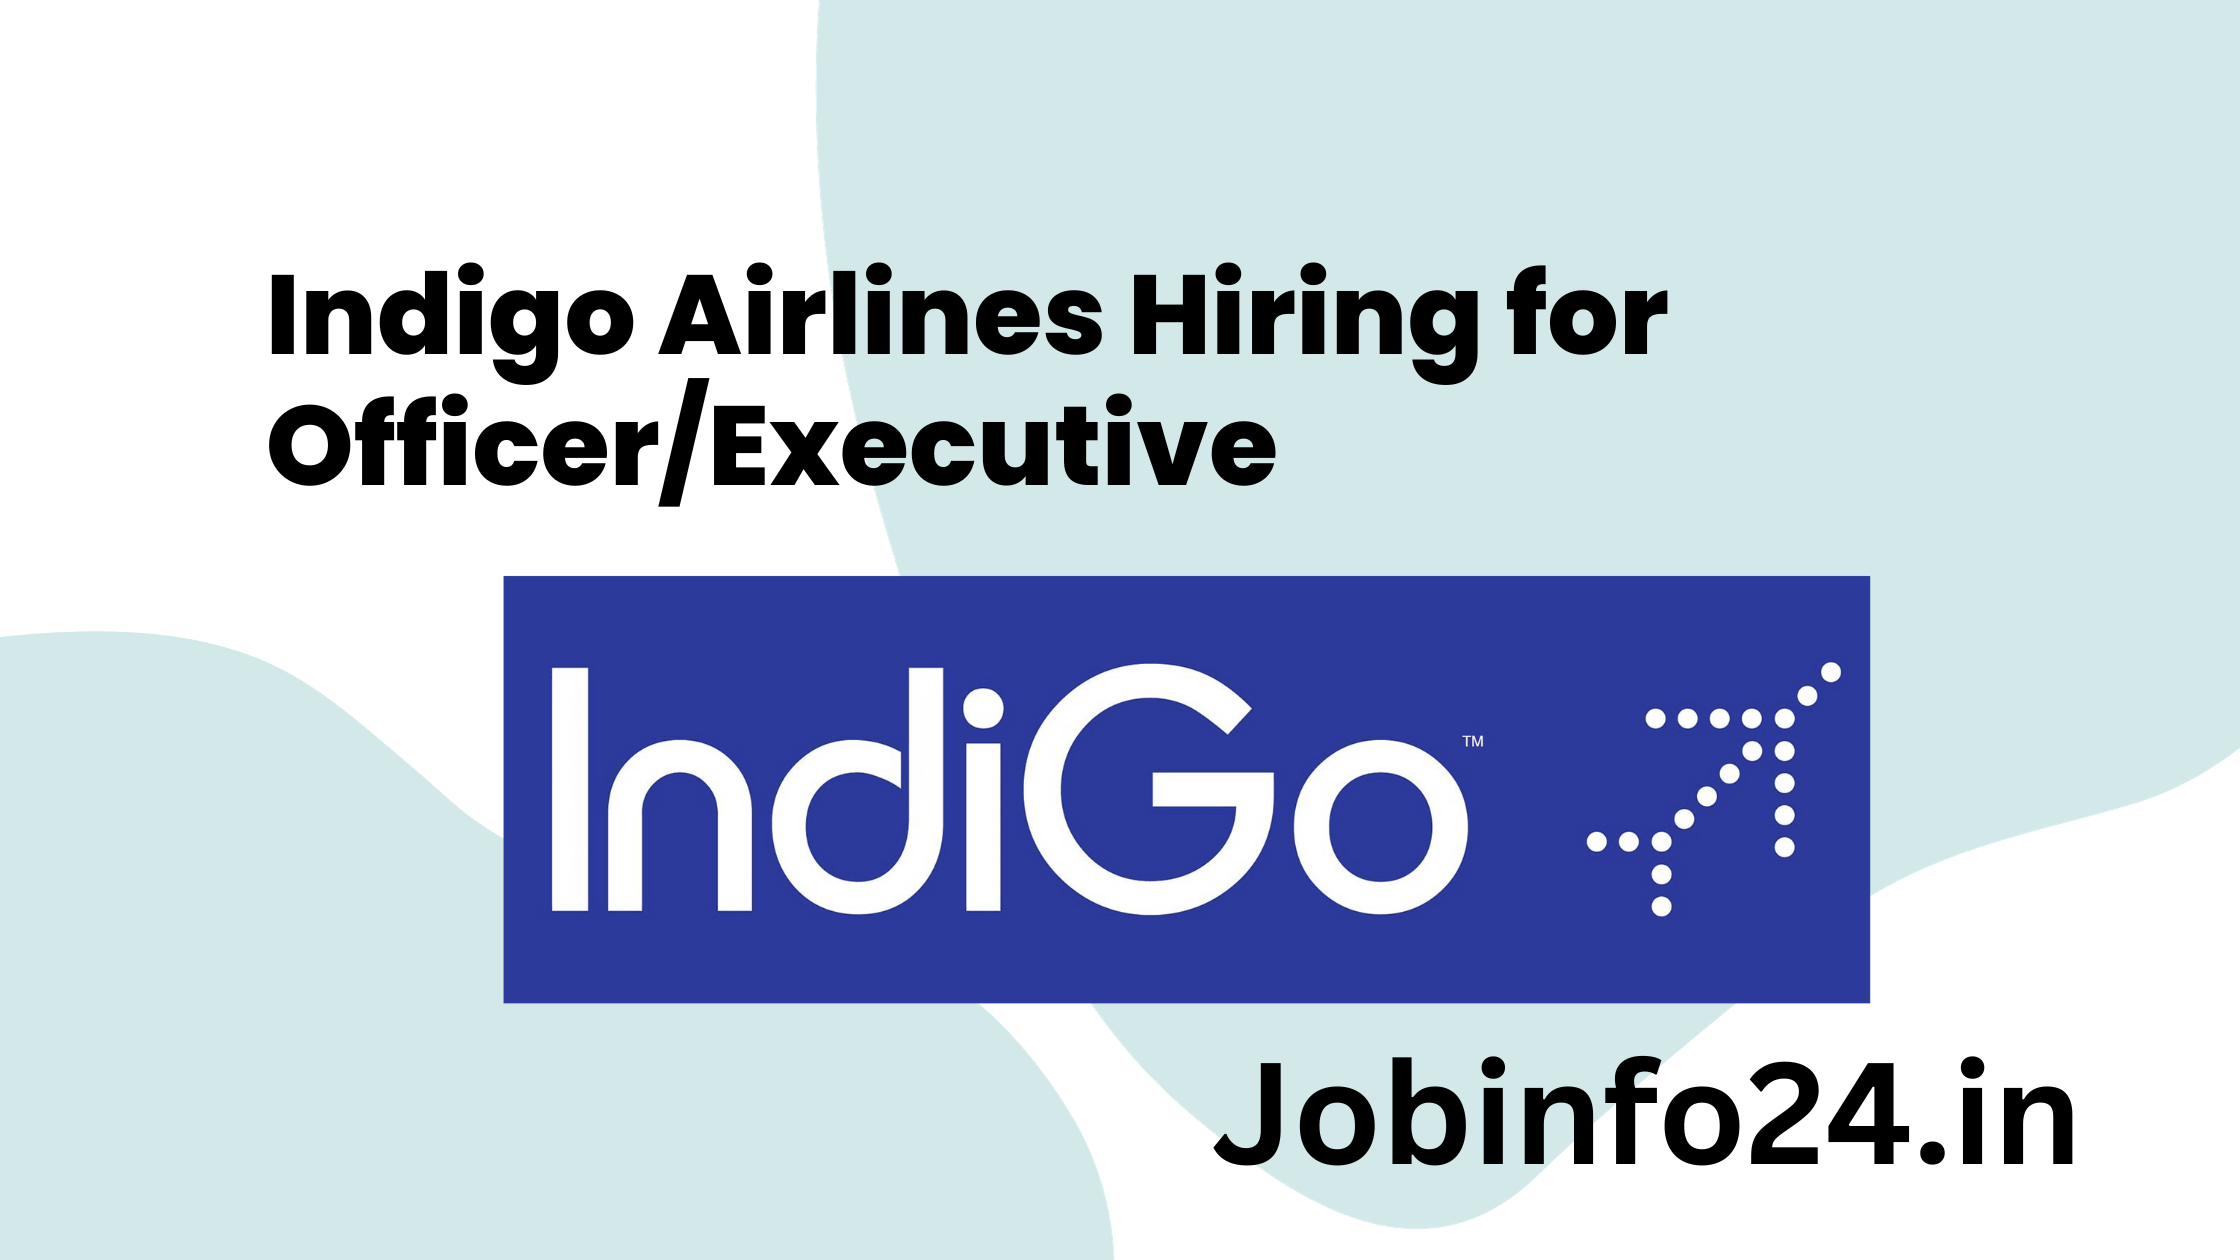 Indigo Airlines Hiring for Officer/Executive